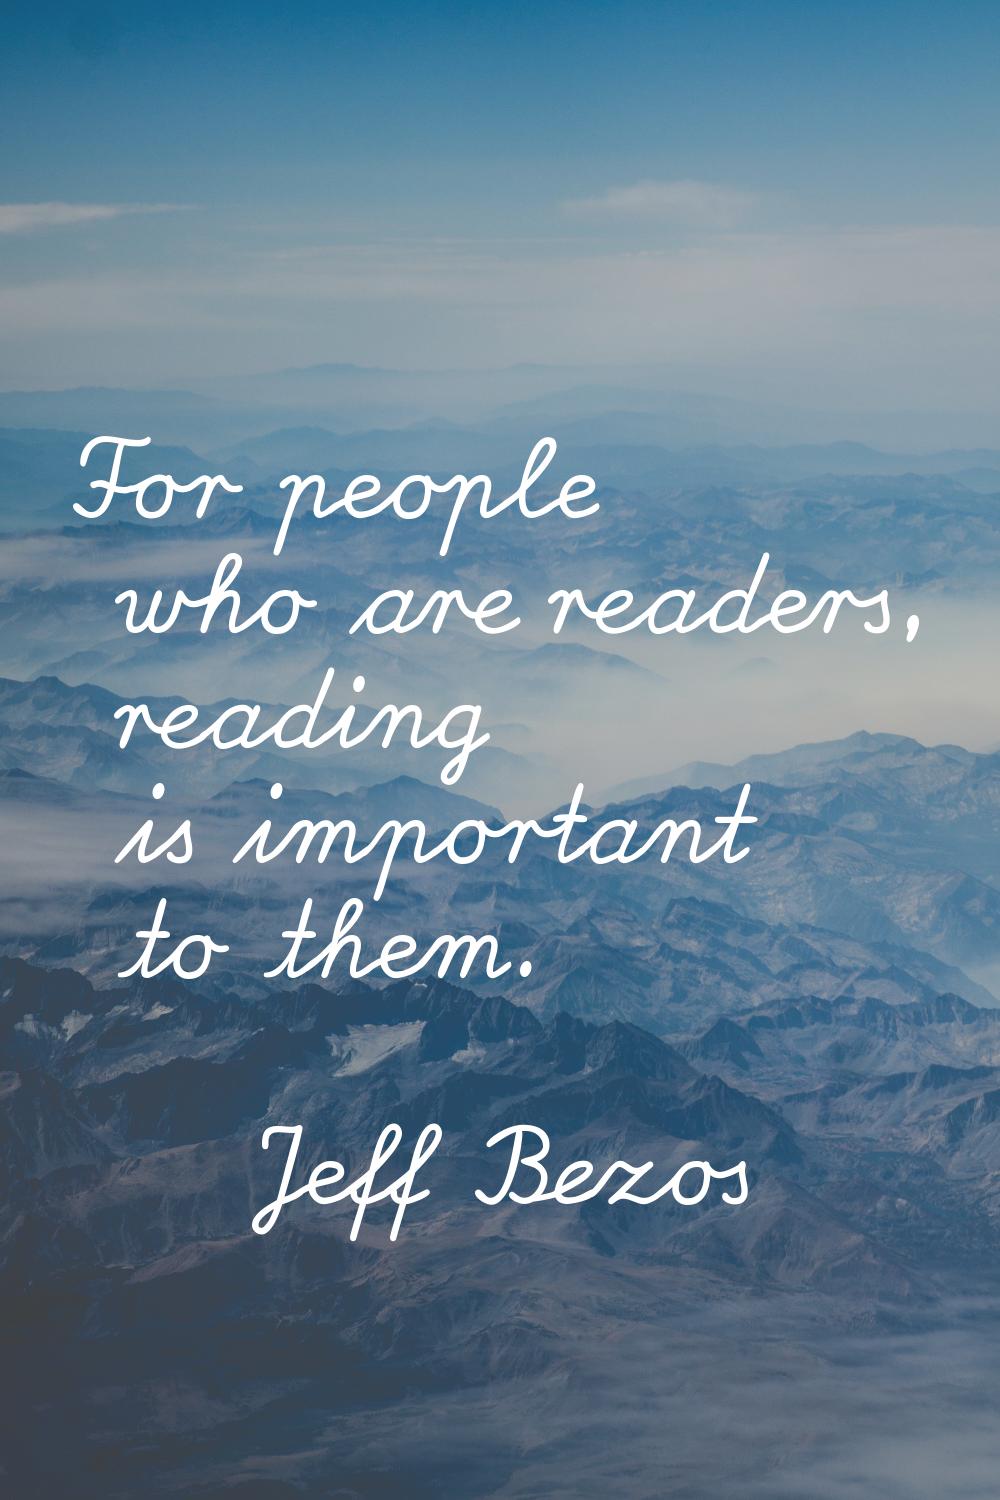 For people who are readers, reading is important to them.